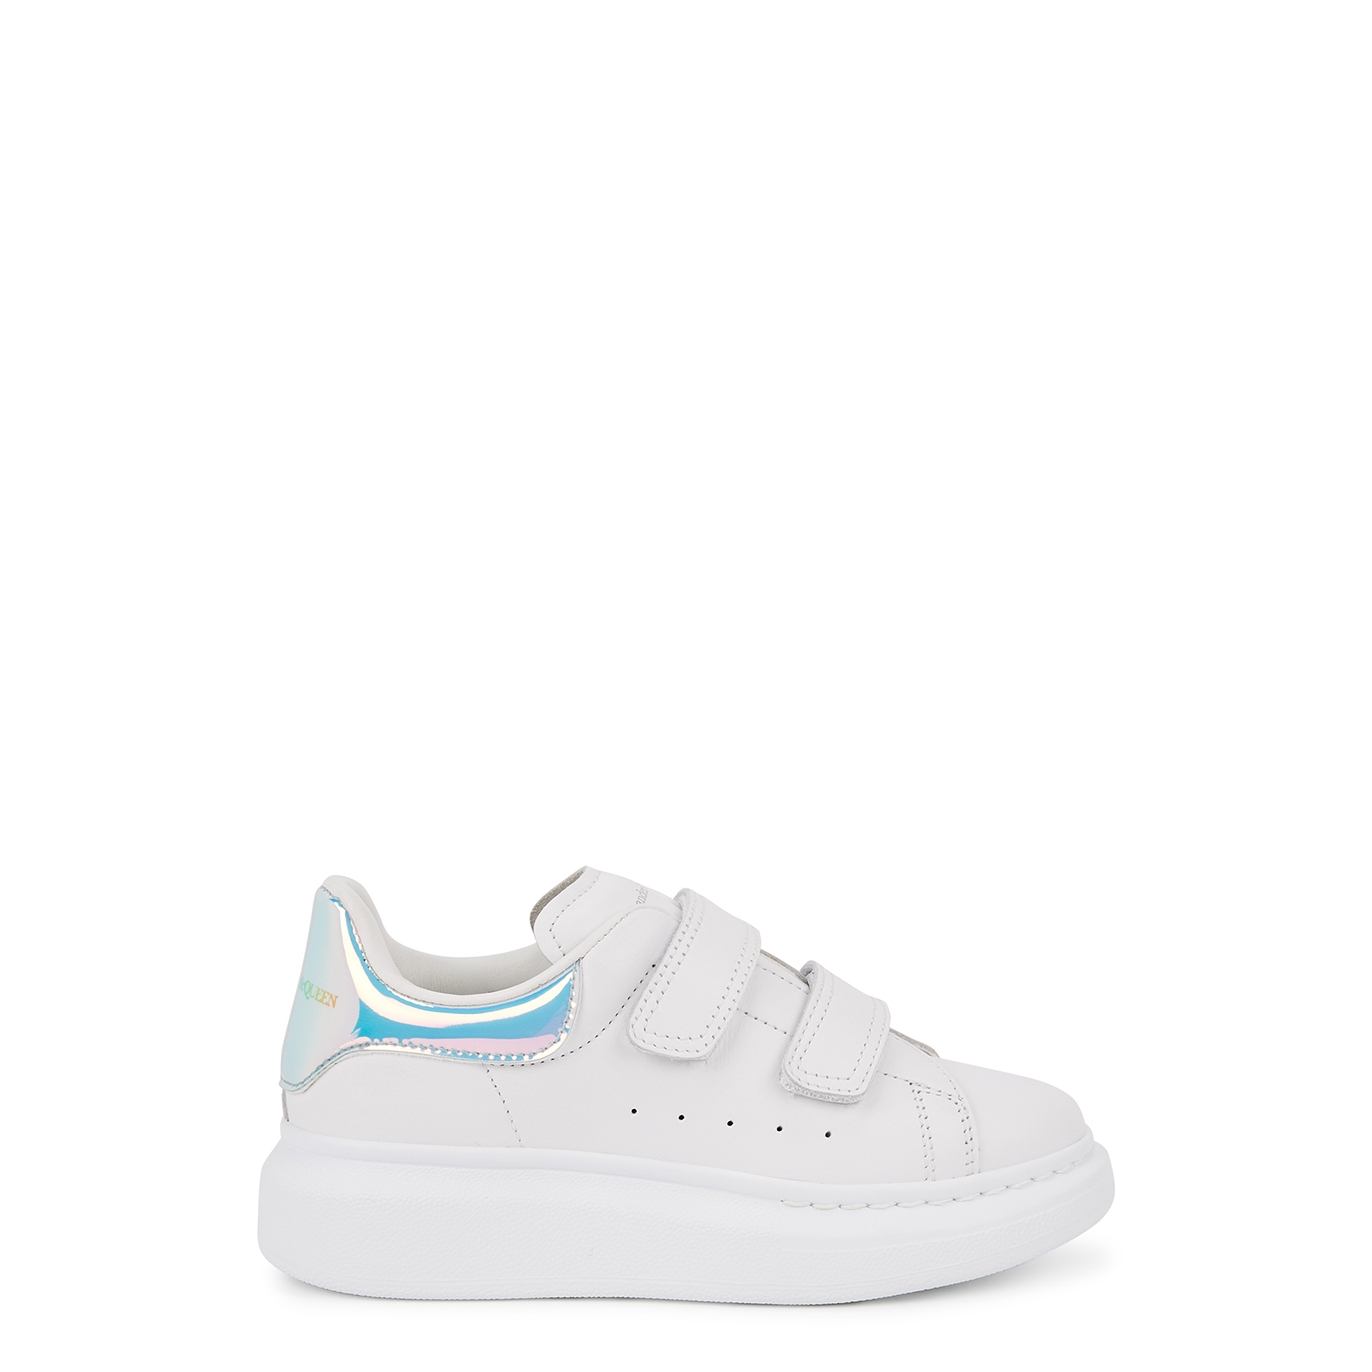 Alexander McQueen Kids Oversized White Leather Sneakers - White & Other - 12.5 Jnr